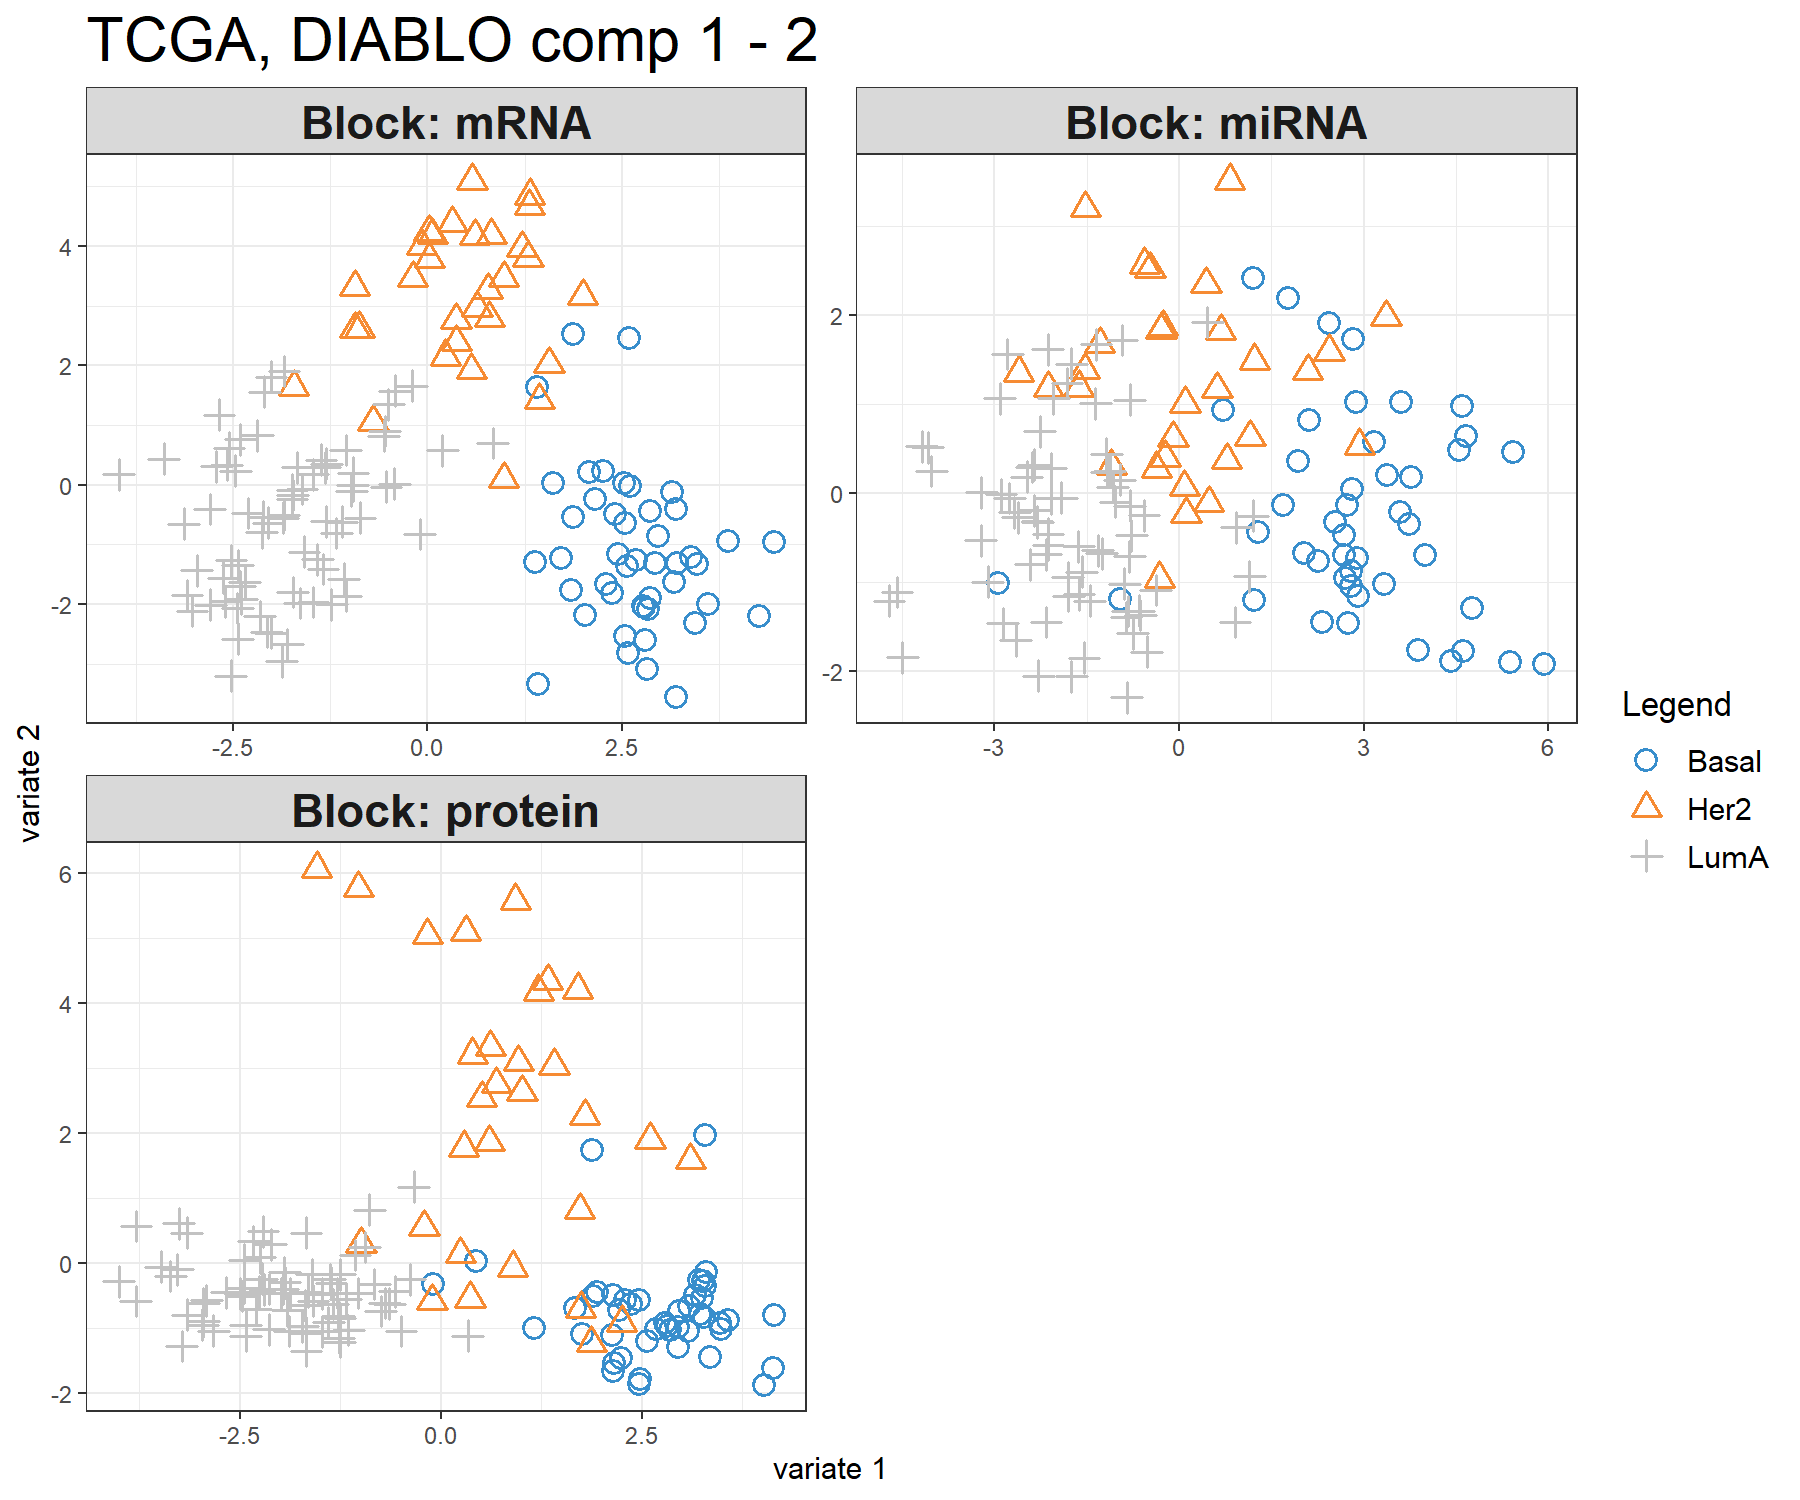 Sample plot from multiblock sPLS-DA performed on the breast.TCGA study. The samples are plotted according to their scores on the first 2 components for each data set. Samples are coloured by cancer subtype and are classified into three classes: Basal, Her2 and LumA. The plot shows the degree of agreement between the different data sets and the discriminative ability of each data set.